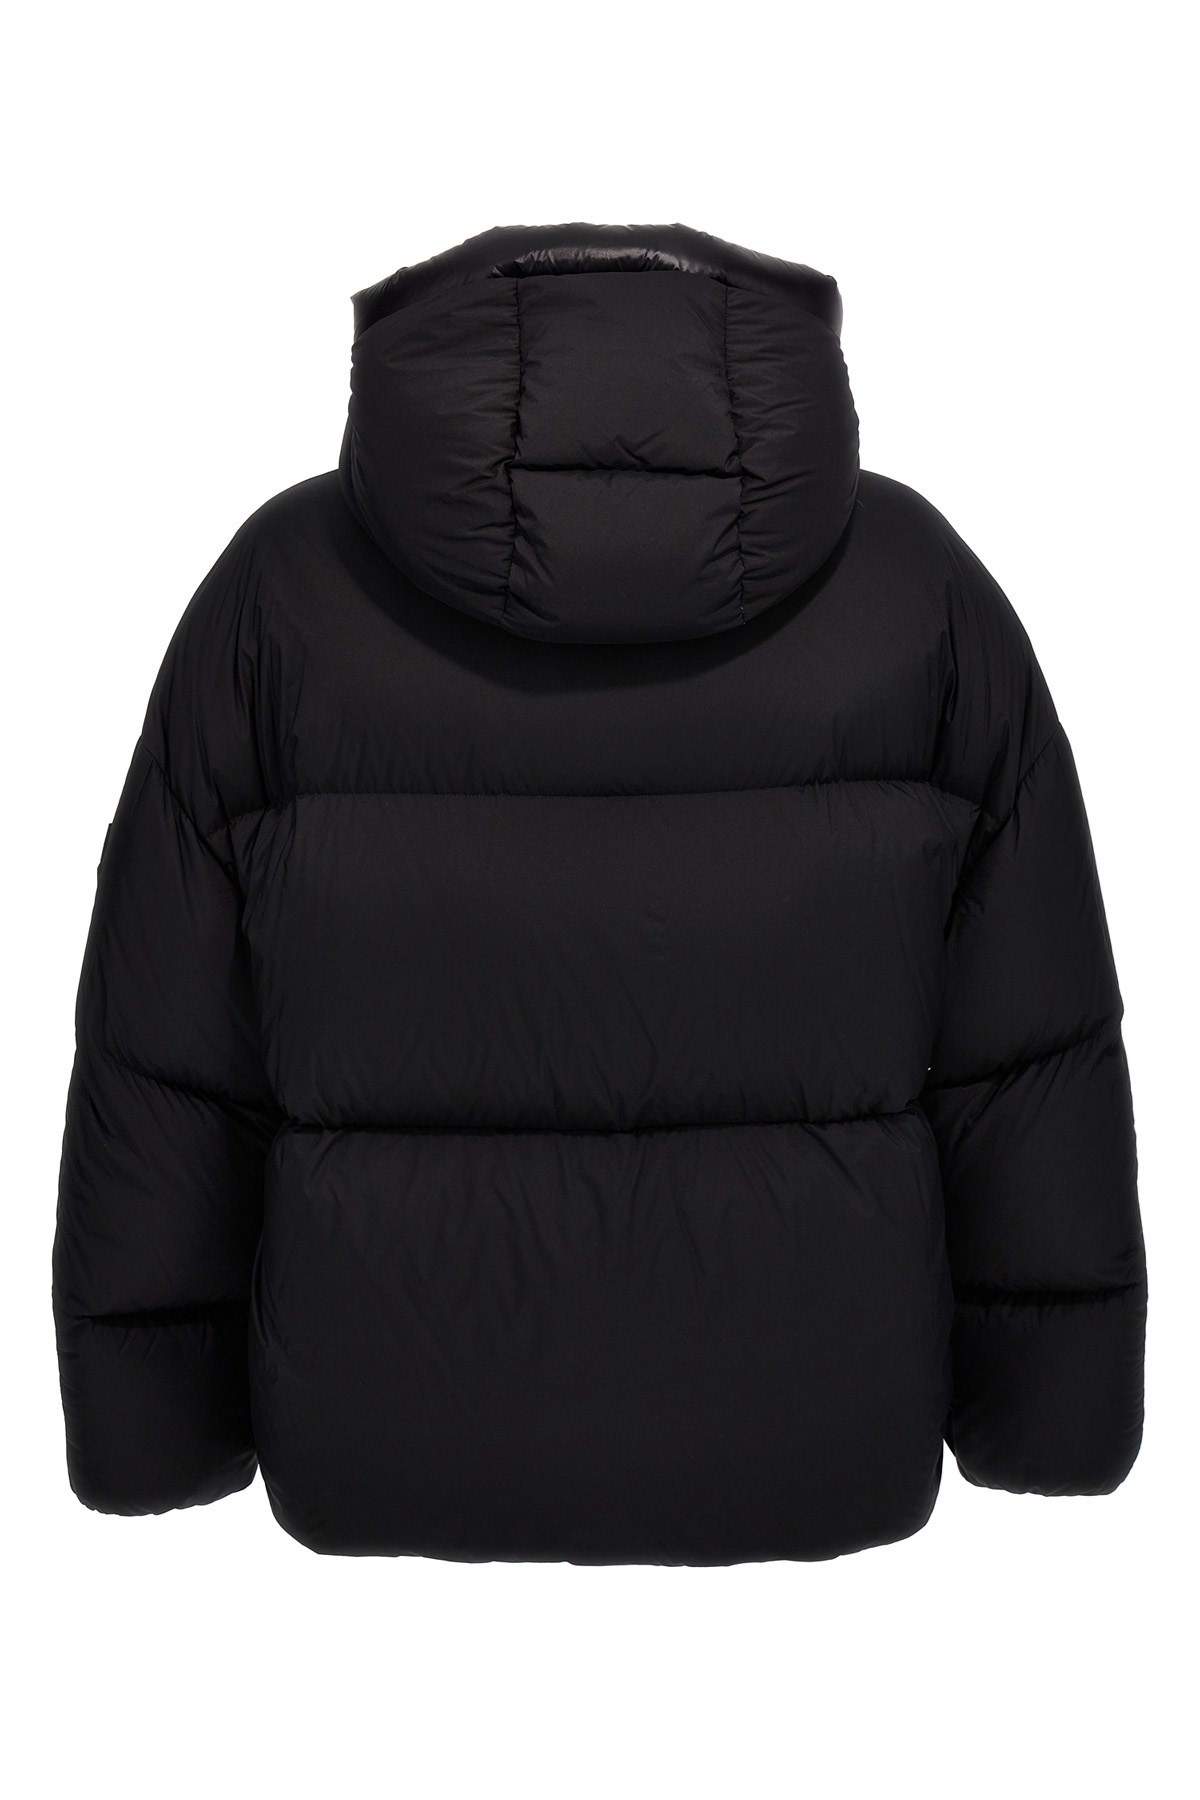 Moncler Genius Roc Nation by Jay-Z down jacket - 2